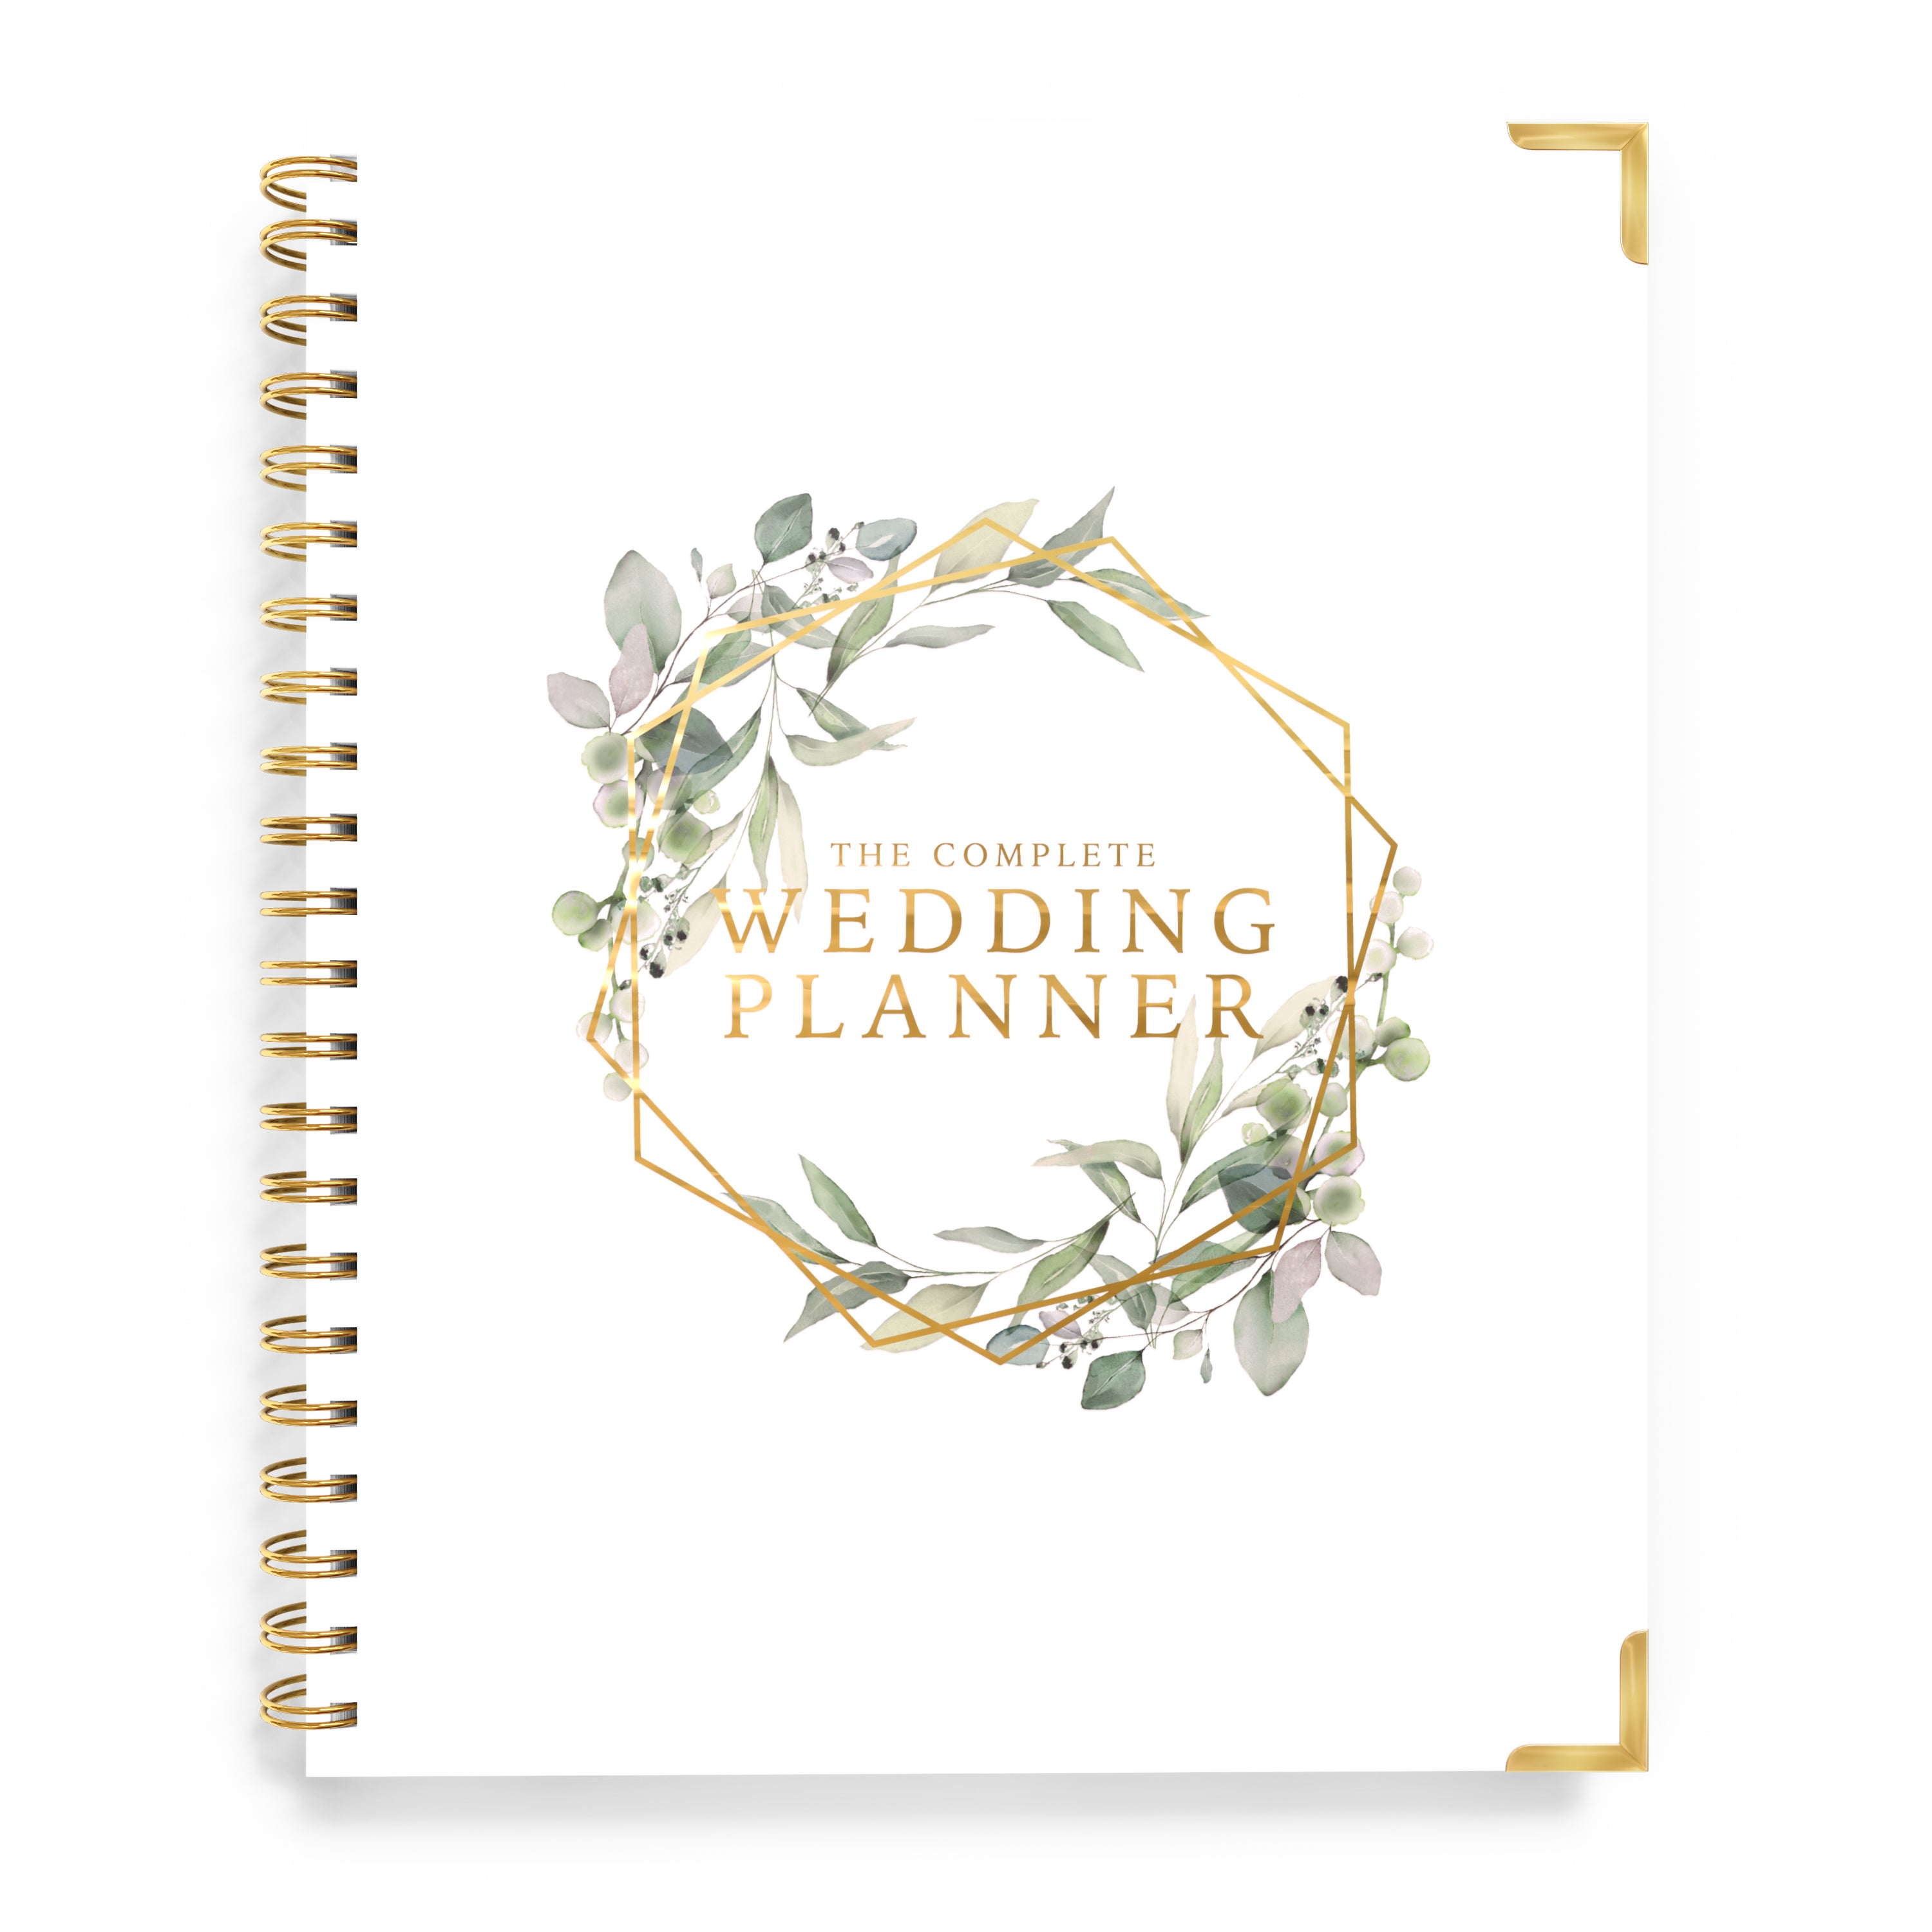  Your Perfect Day Wedding Planner for Bride - Planning